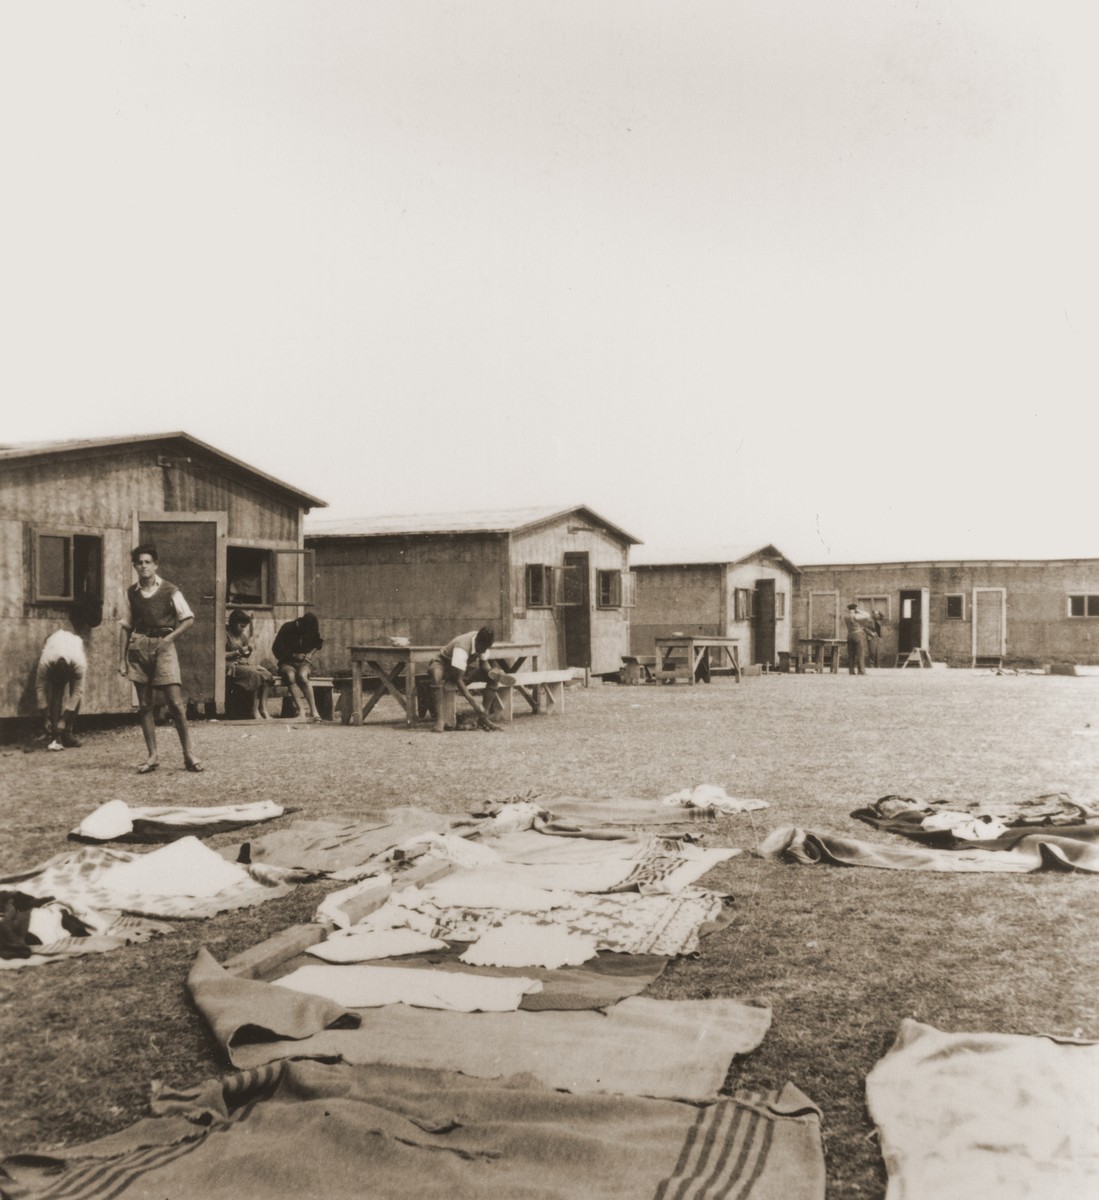 At a refugee camp established for members of the Kladovo transport, Zionist youth perform their daily tasks in front of their barracks.